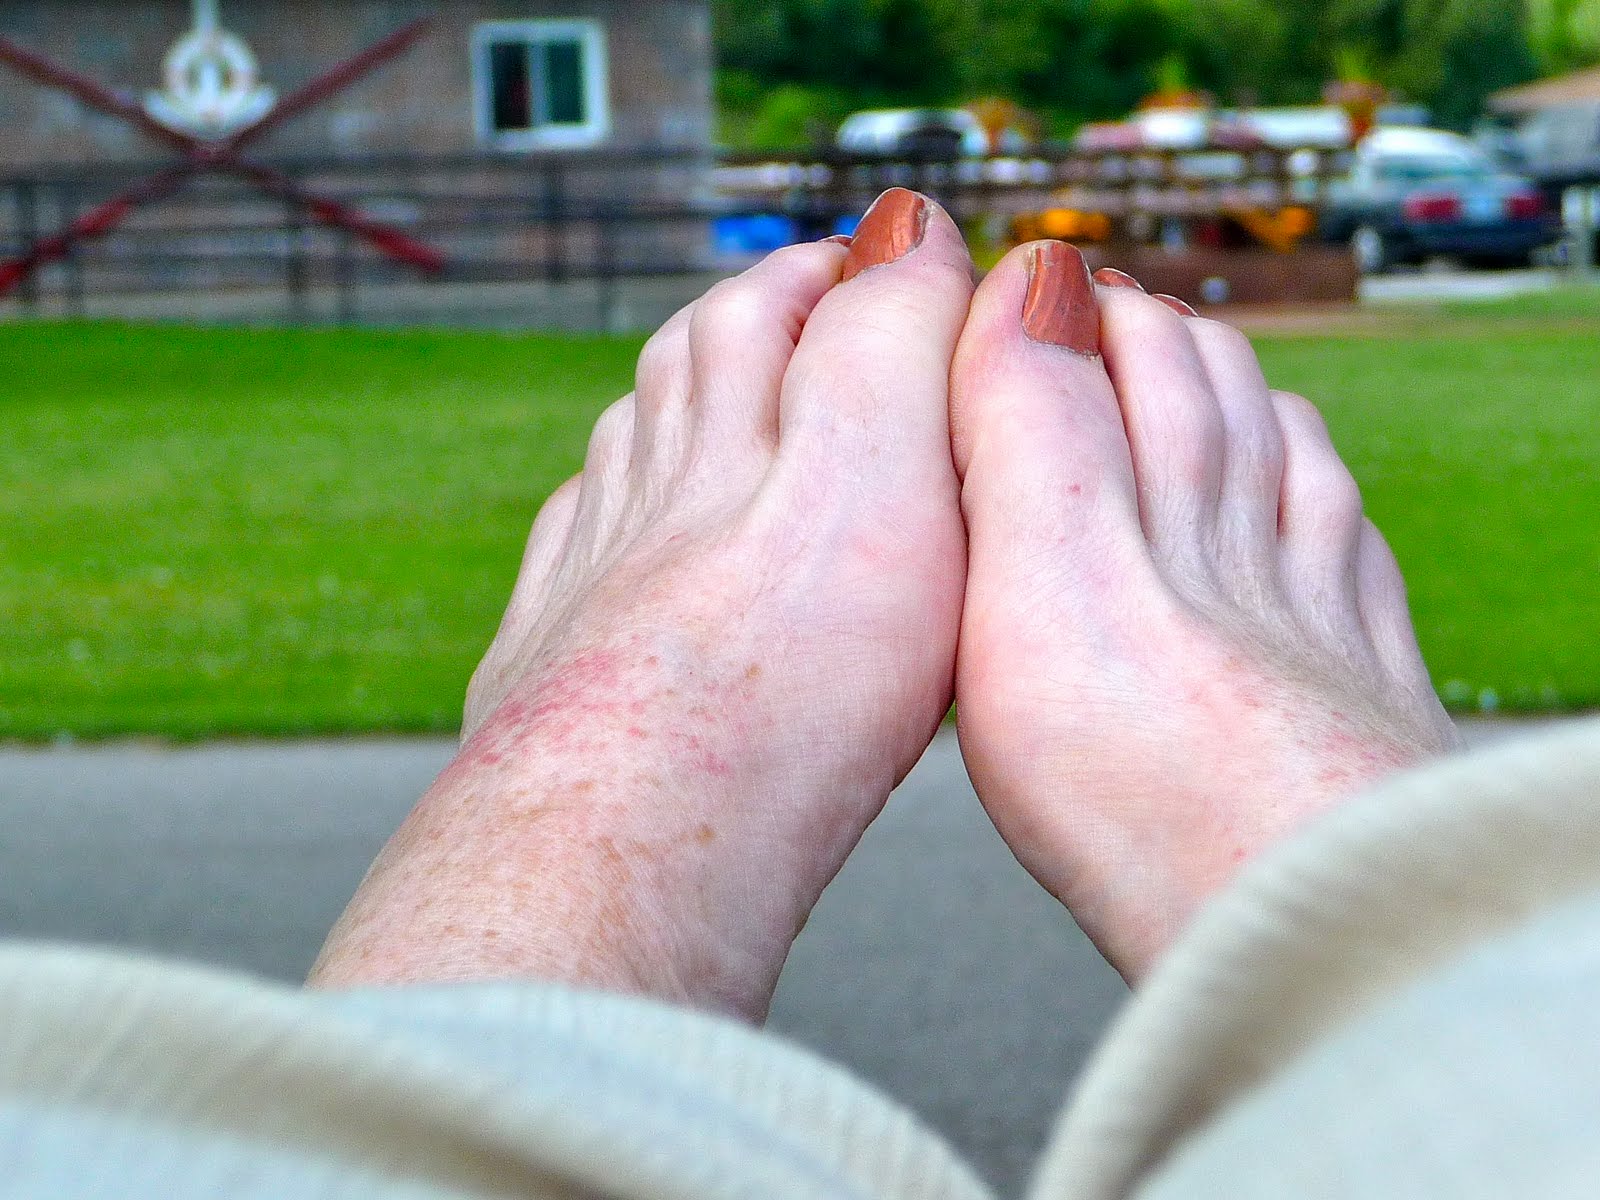 heat rash on foot pictures #10